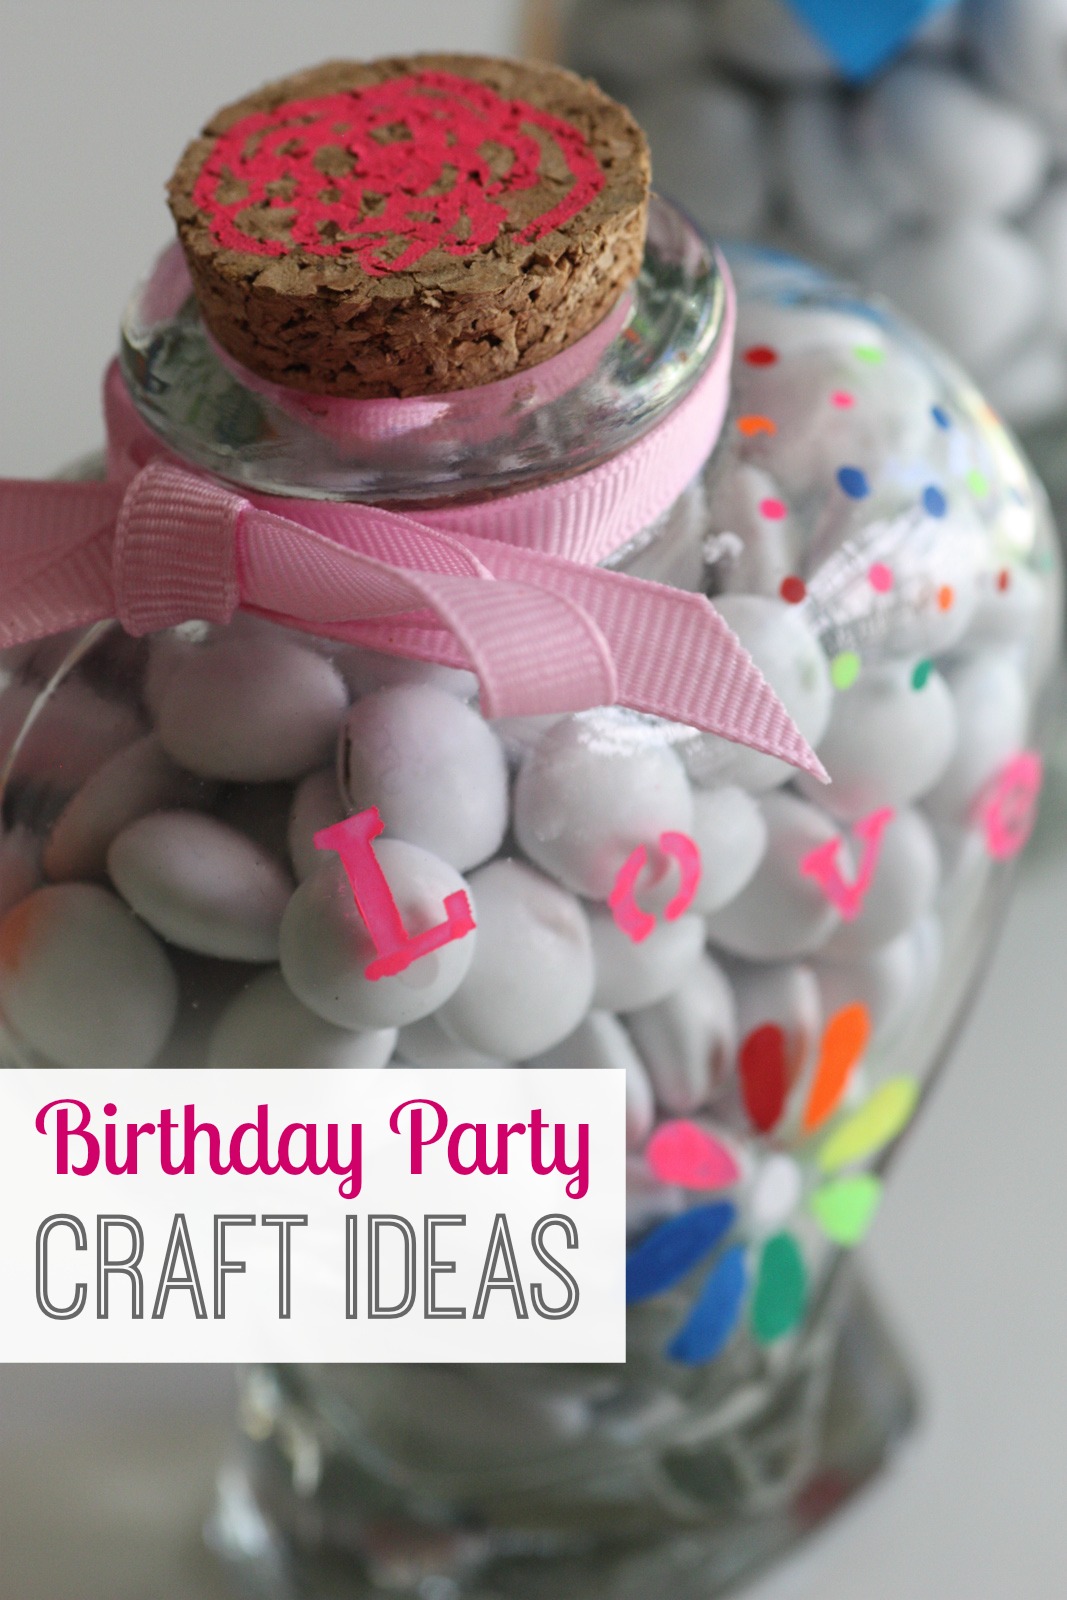 Crafts To Make Your Halloween Birthday Party Extra Special